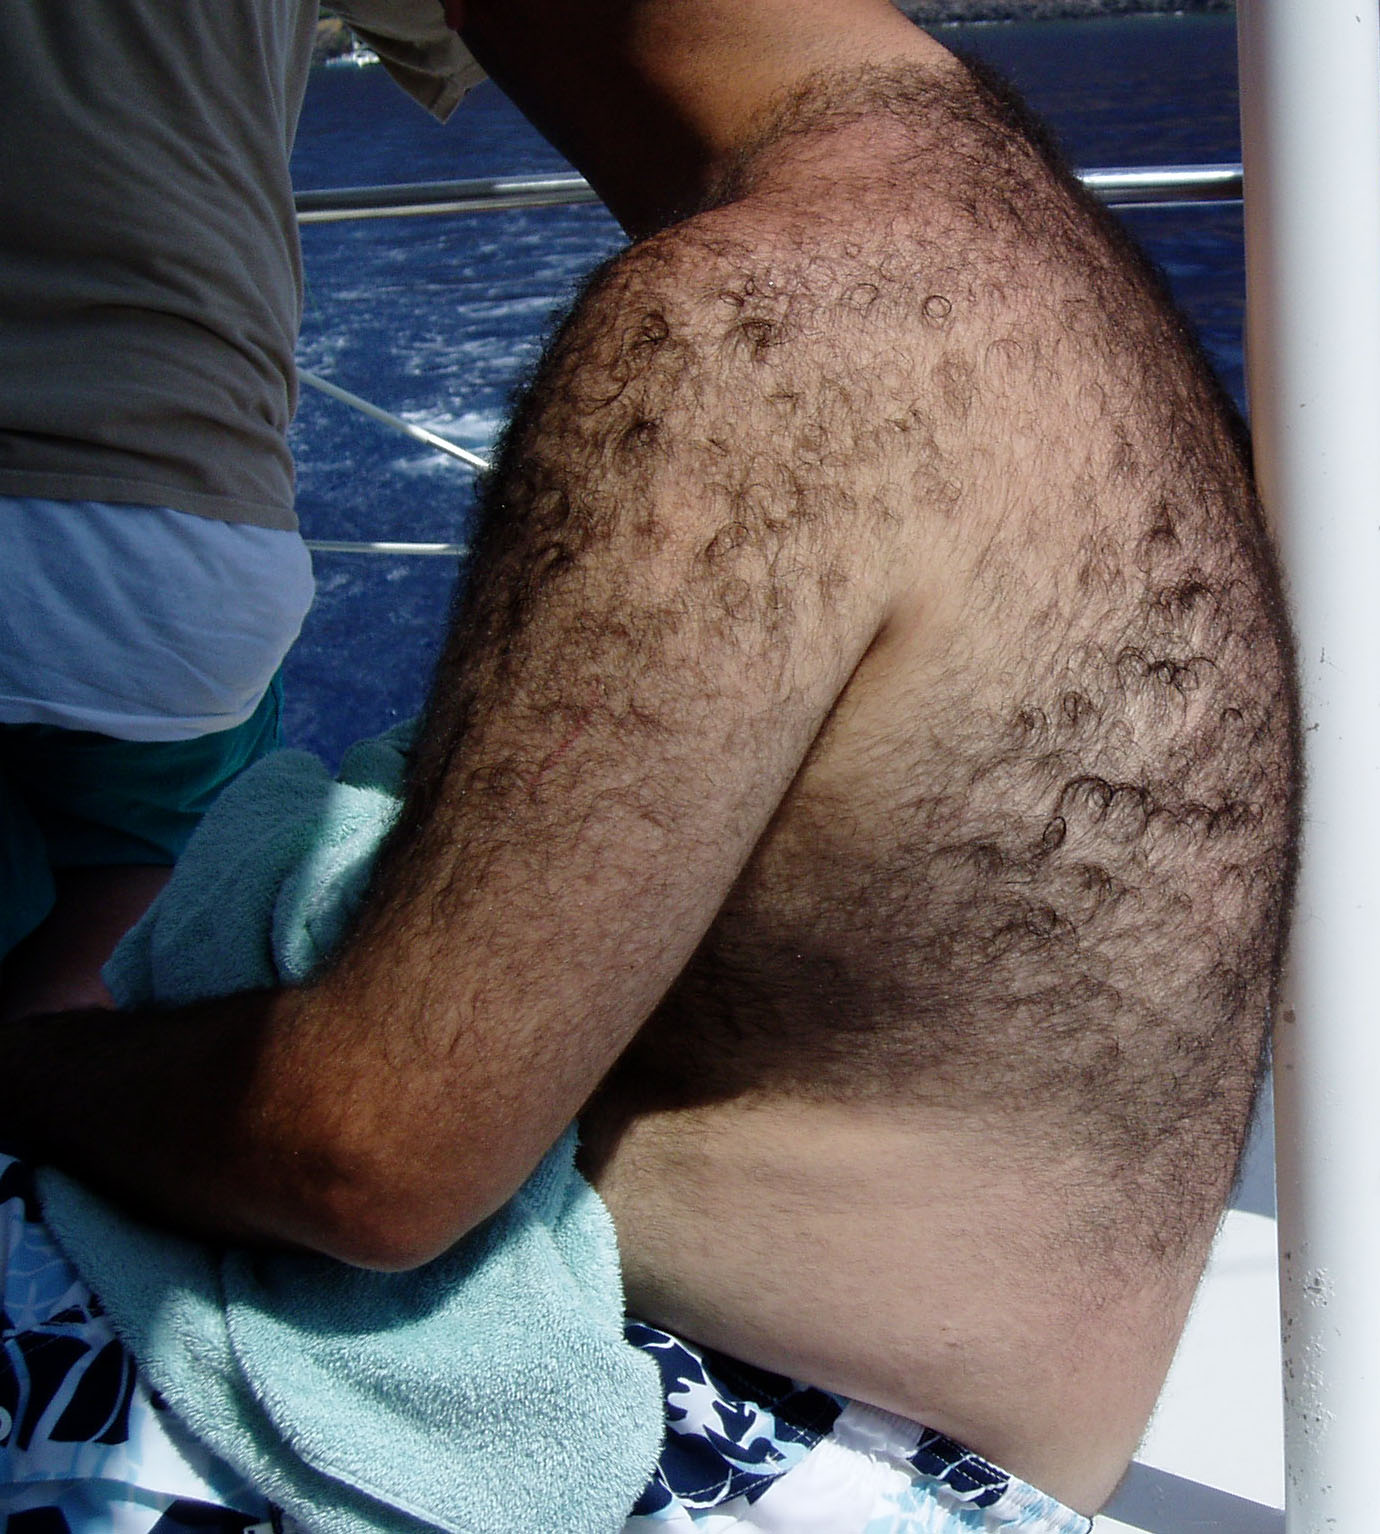 How do you manage excessive body hair?